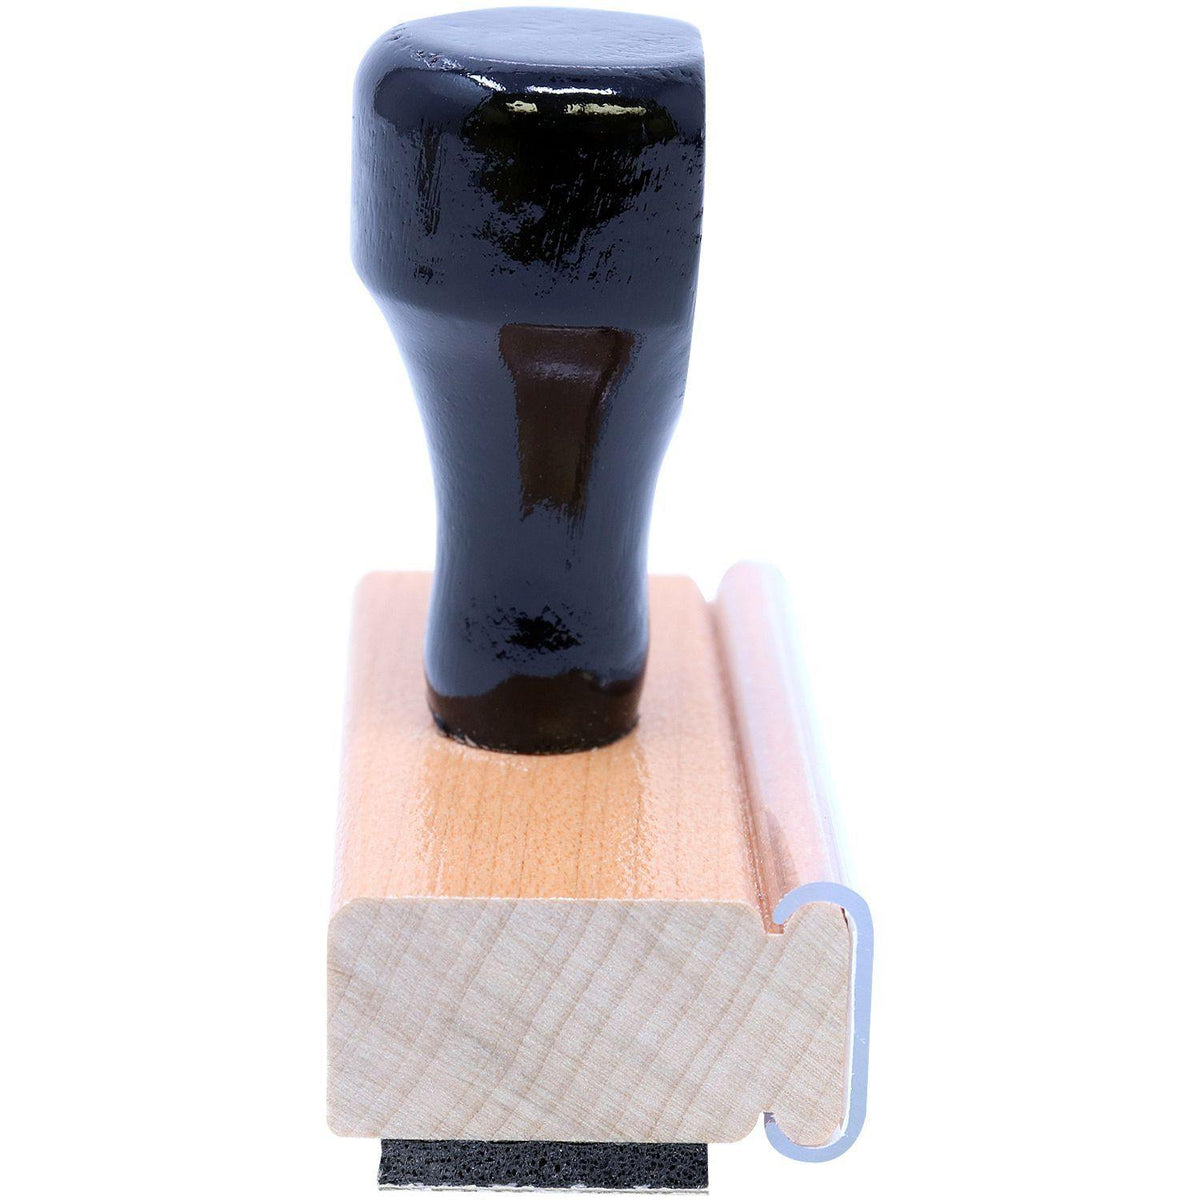 Paid with Ck No Stamp Rubber Stamp - Engineer Seal Stamps - Brand_Acorn, Impression Size_Small, Stamp Type_Regular Stamp, Type of Use_Business, Type of Use_Finance, Type of Use_Office